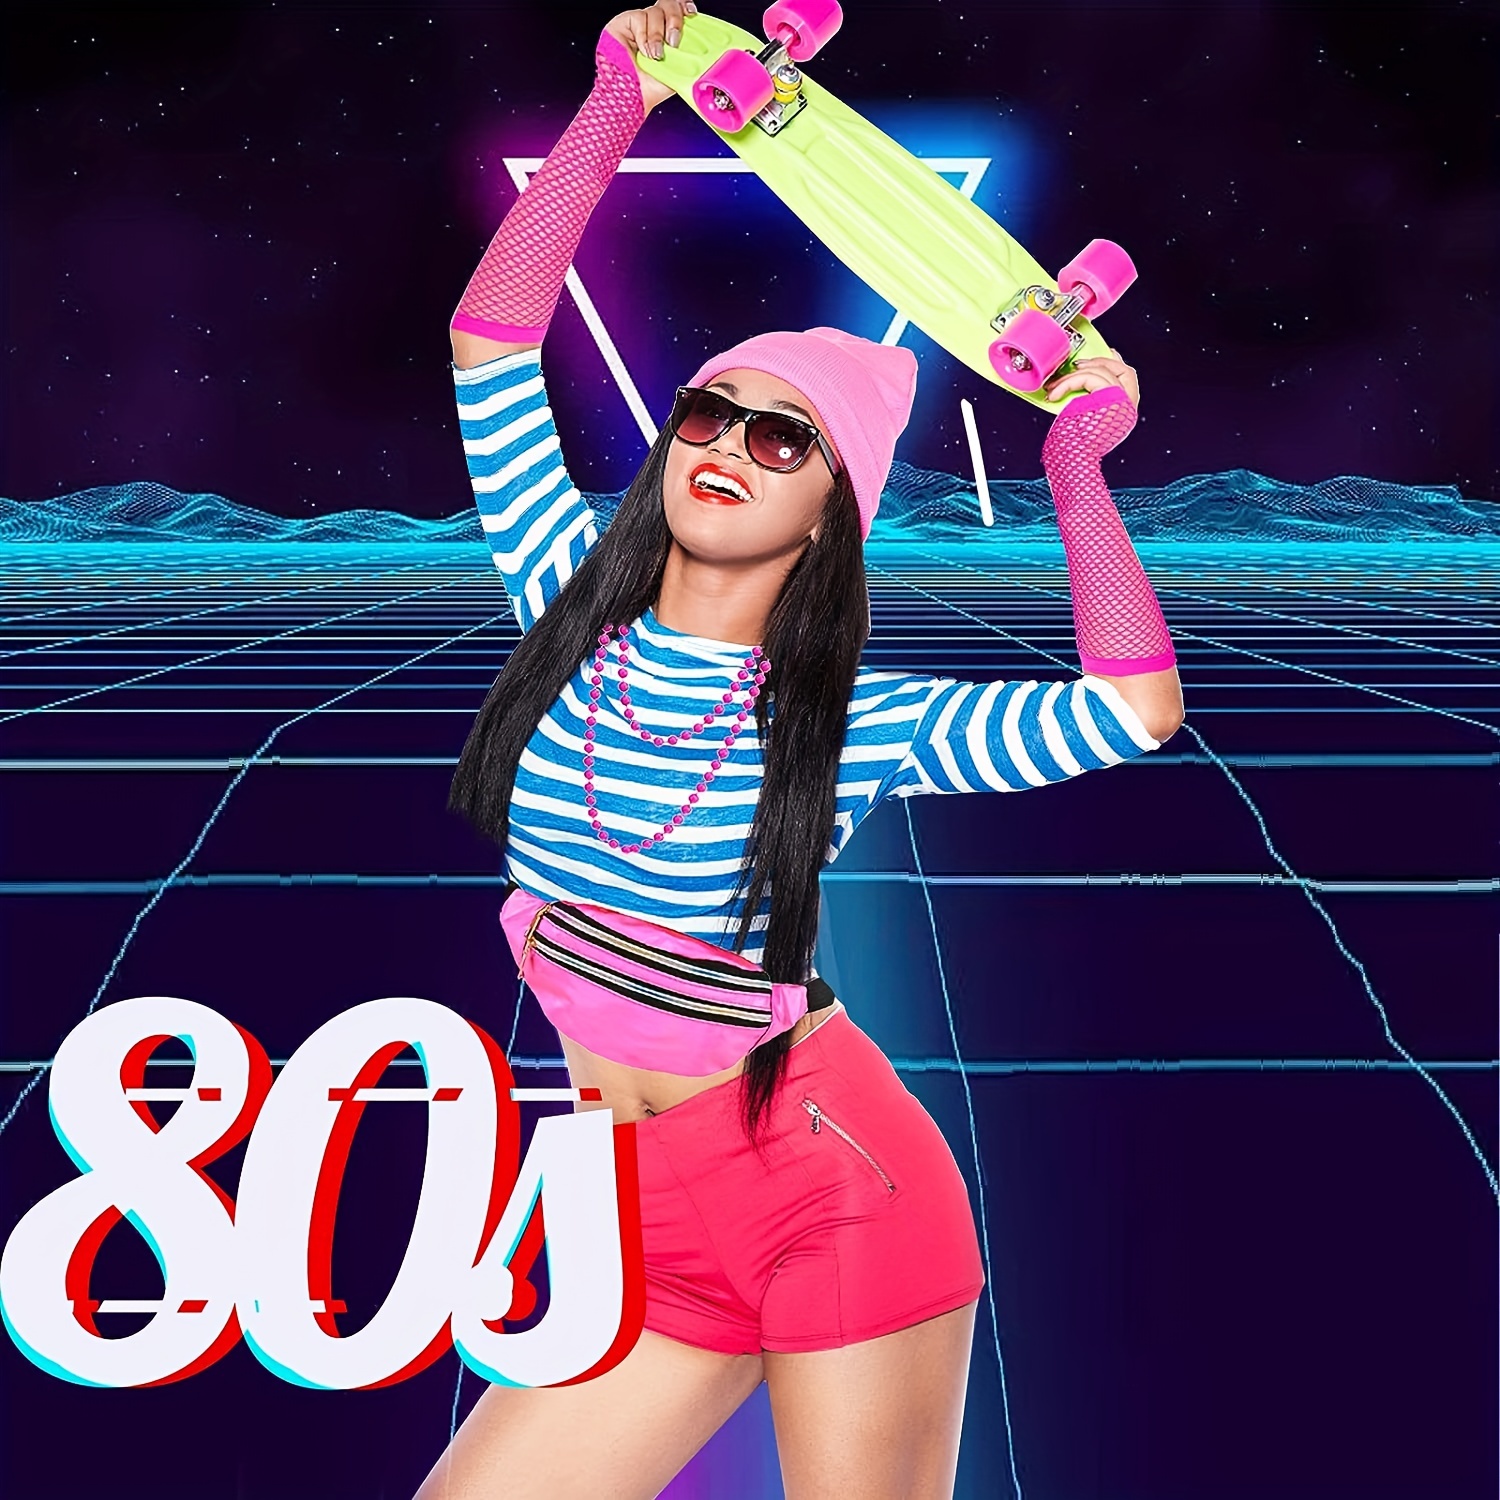 80s Fashion Party Outfits: Neon Roller Skates and Blue Bodysuit